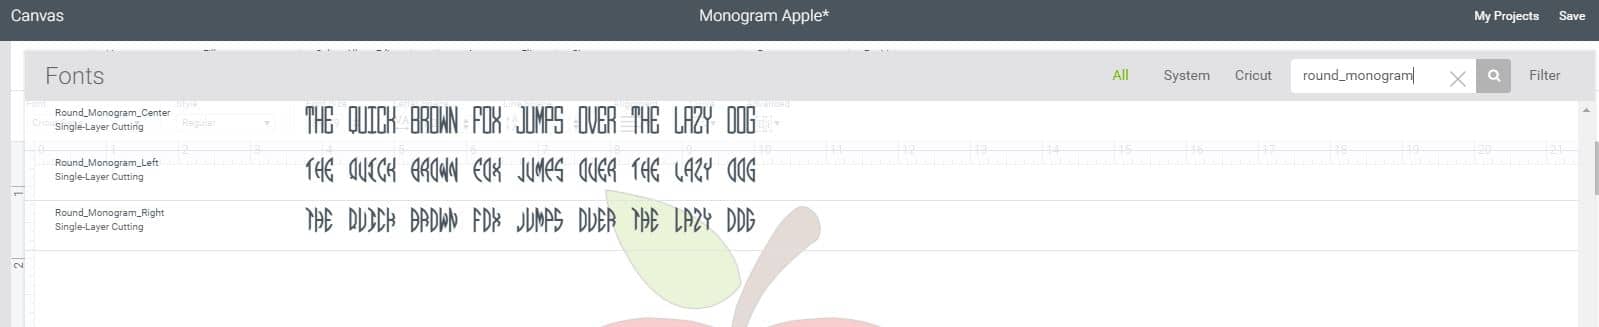 cricut design space with apple monogram design and different texts